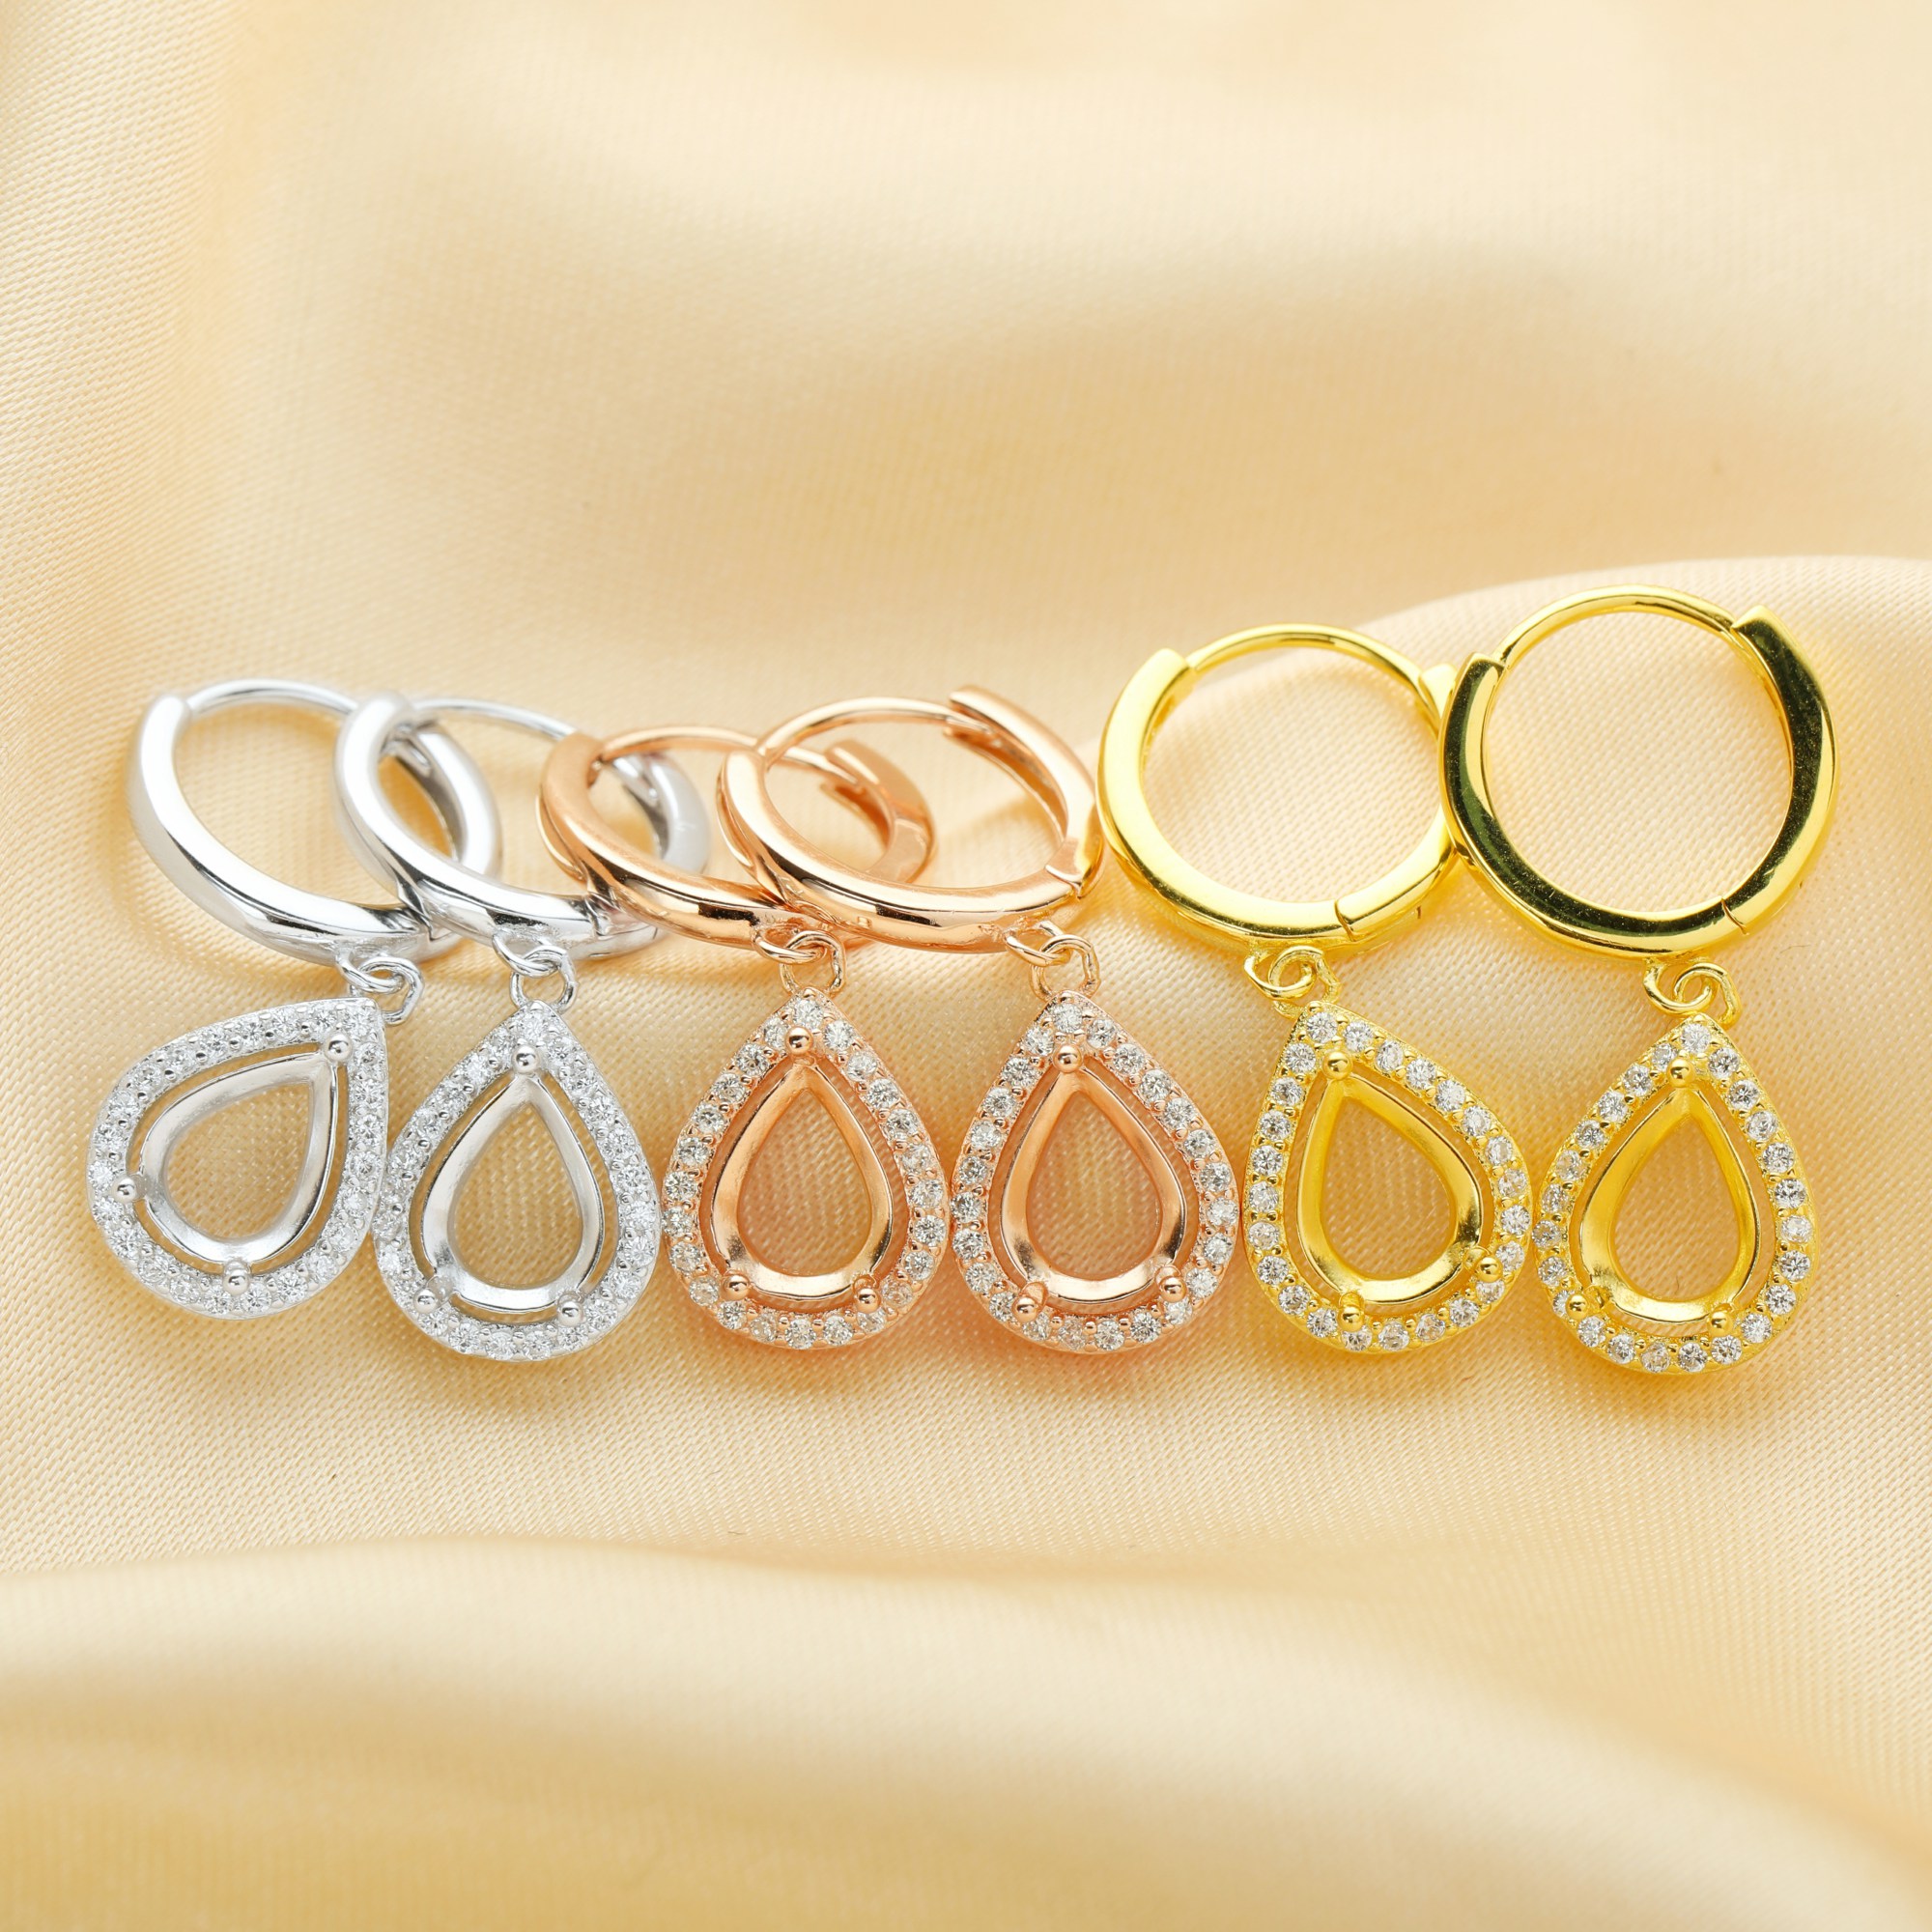 6x8MM Pear Hoop Earrings Settings,Solid 925 Sterling Silver Rose Gold Plated Earrings,Halo Pave CZ Stone Pear Pendant,DIY Earring Supplies 1706137 - Click Image to Close